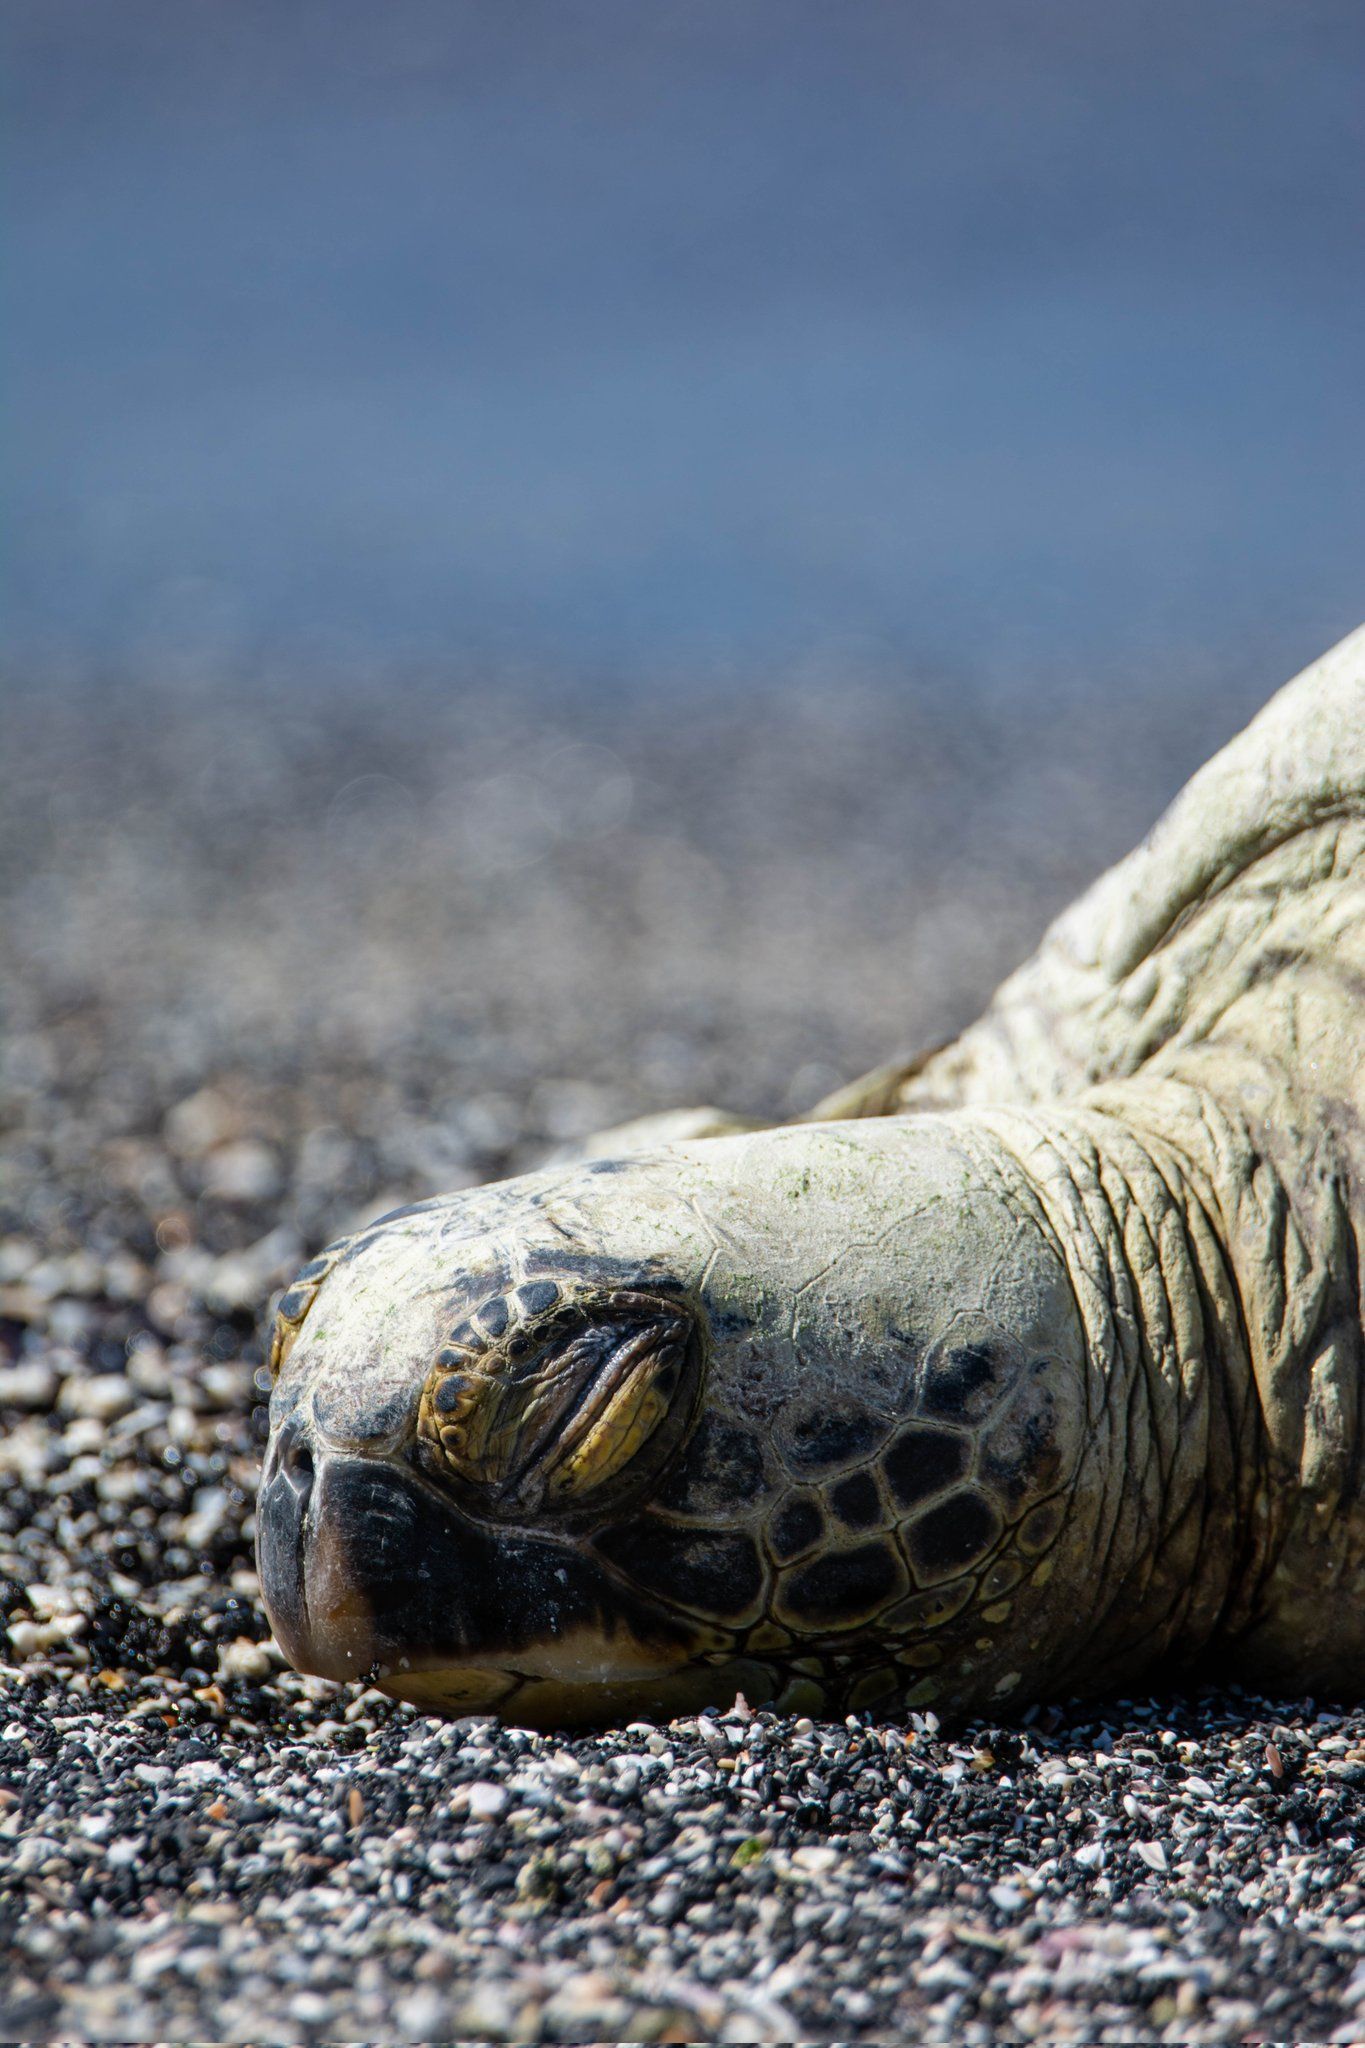 A turtle lying on the beach with its eyes closed. - Sea turtle, turtle